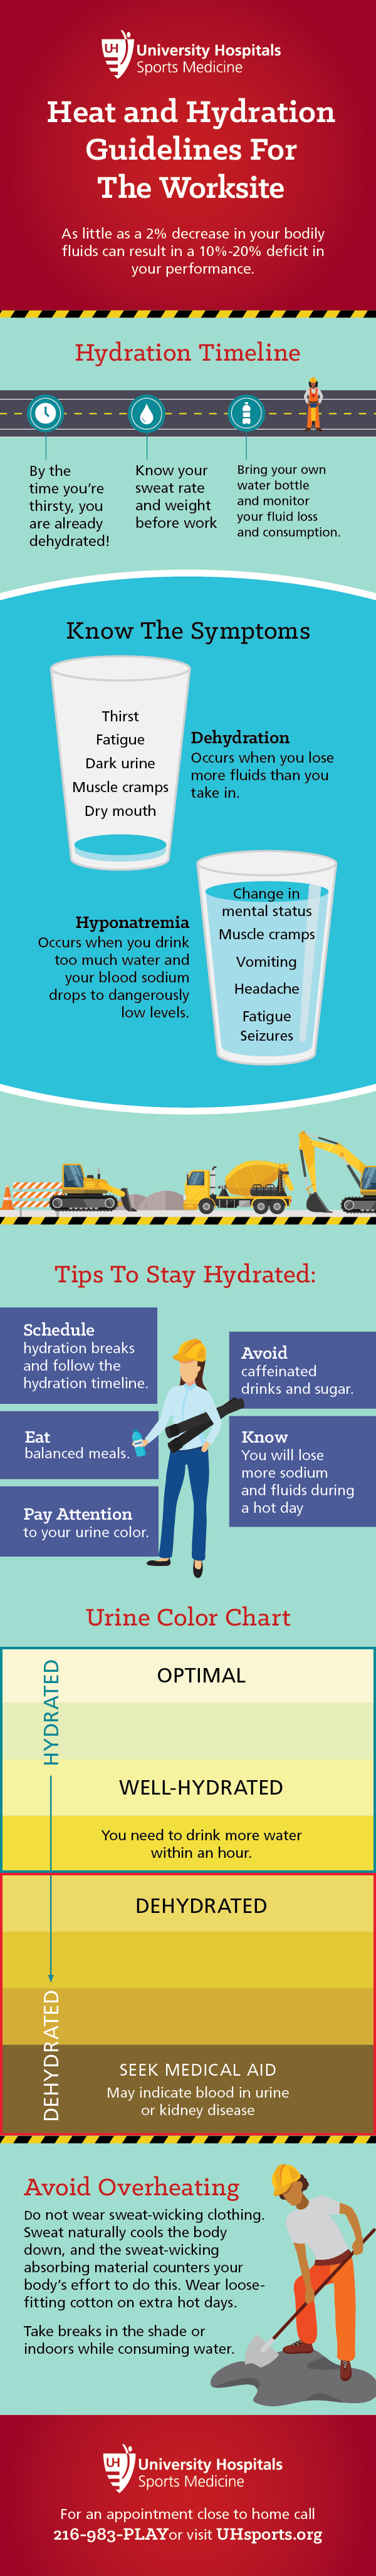 tips for hydration